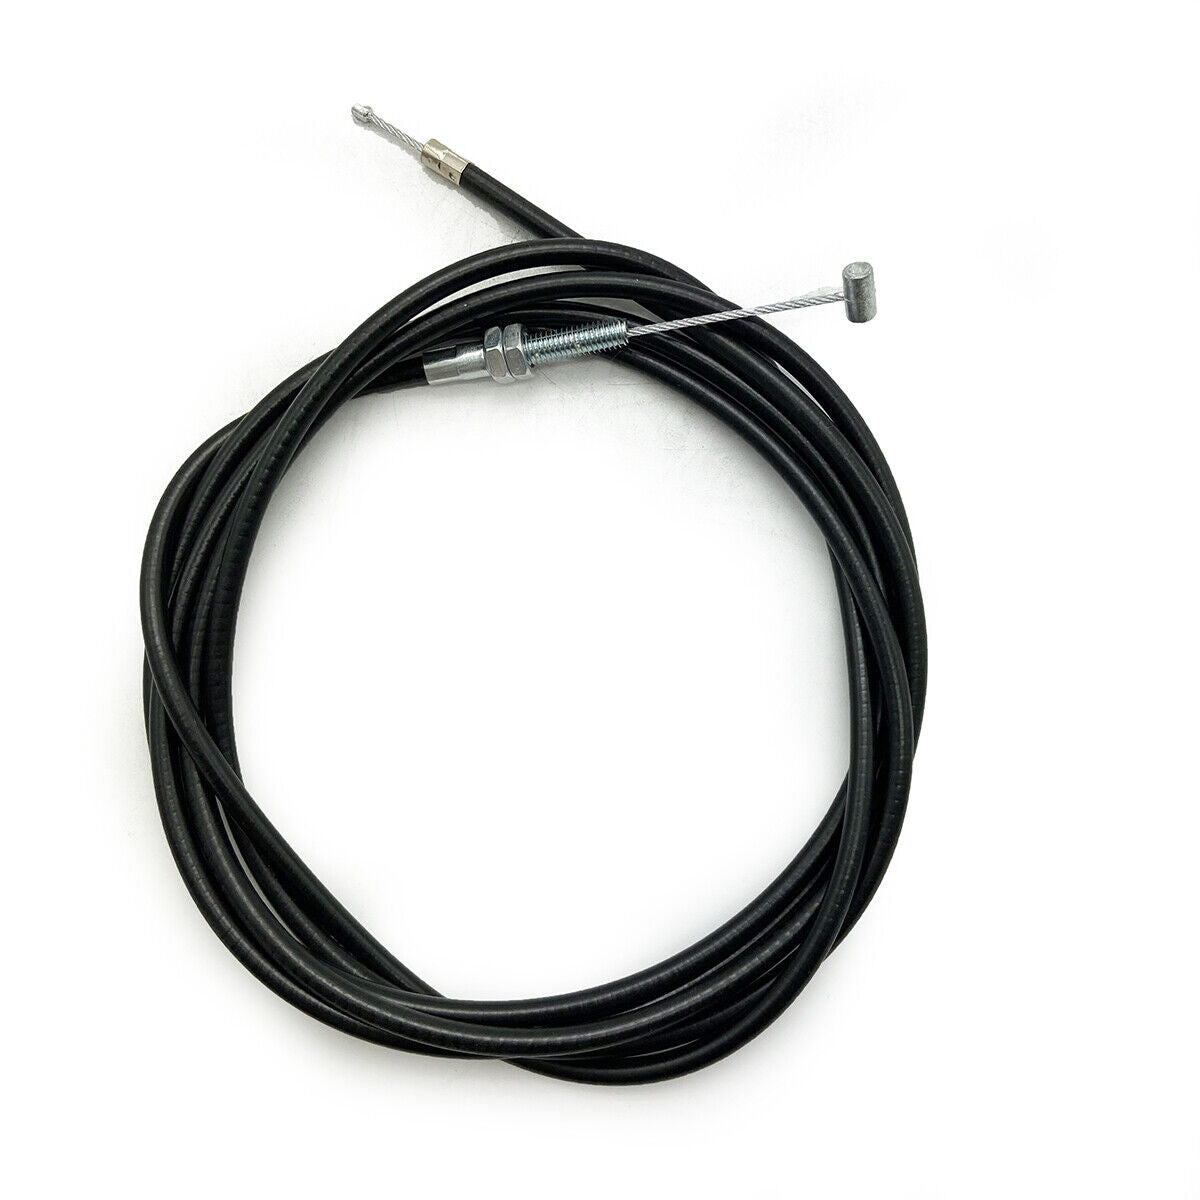 97" Throttle Cable Tao Tao ATK125A